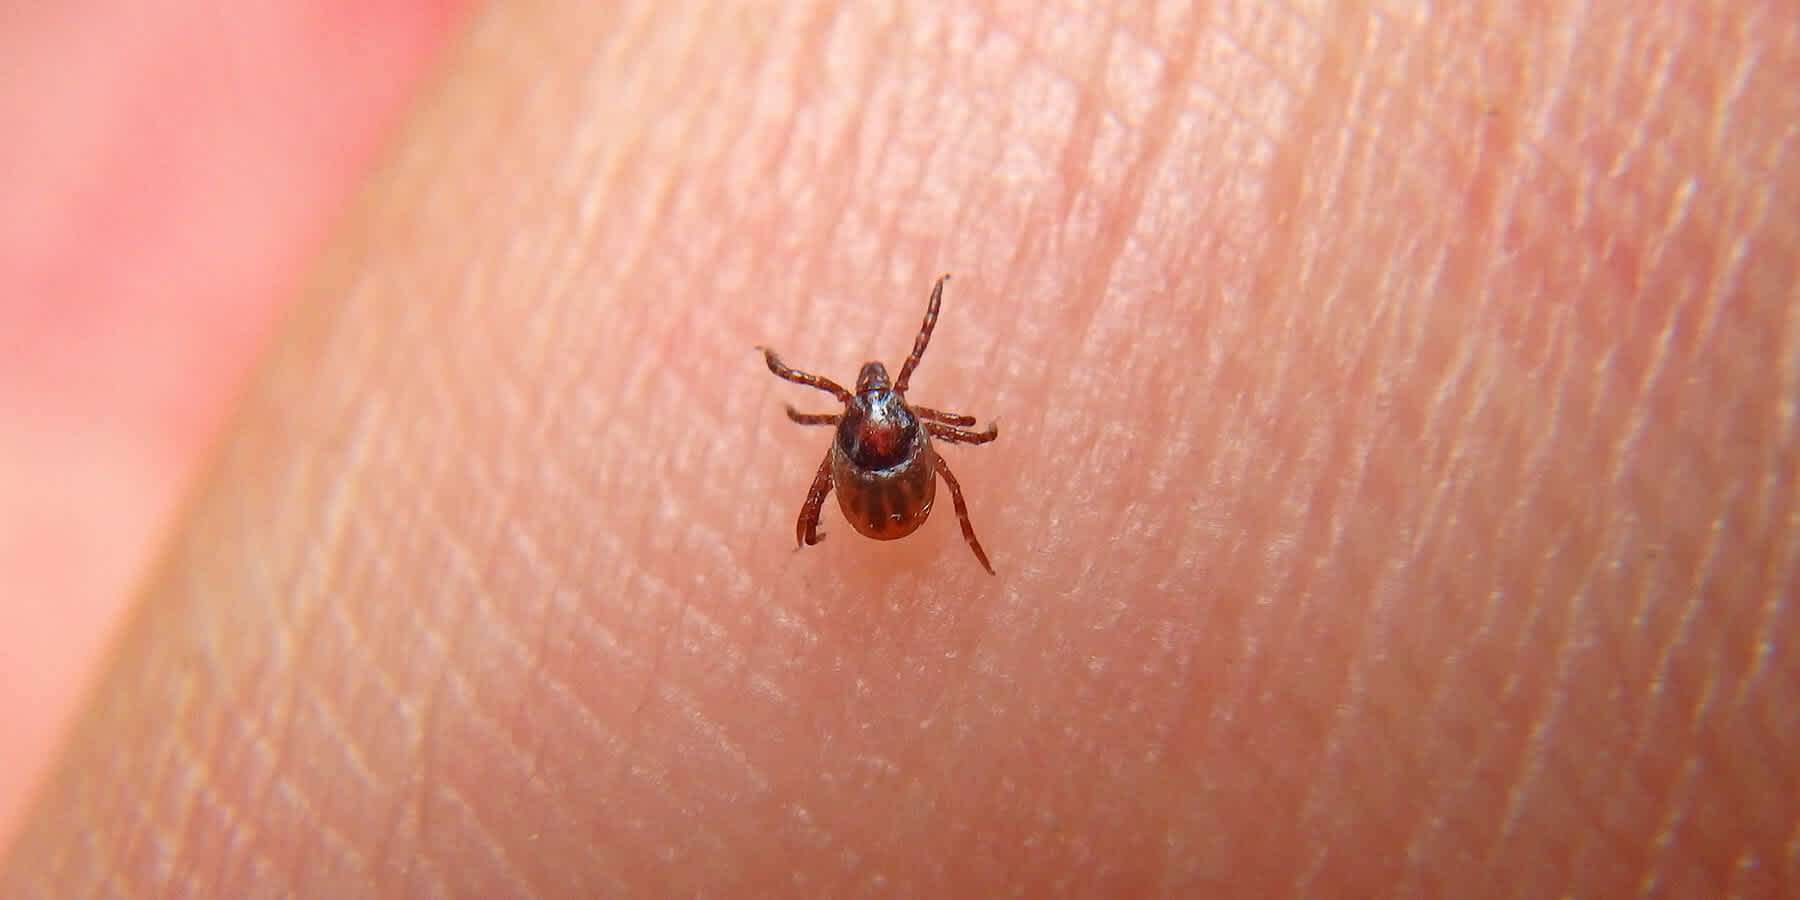 Types of ticks that carry Lyme disease